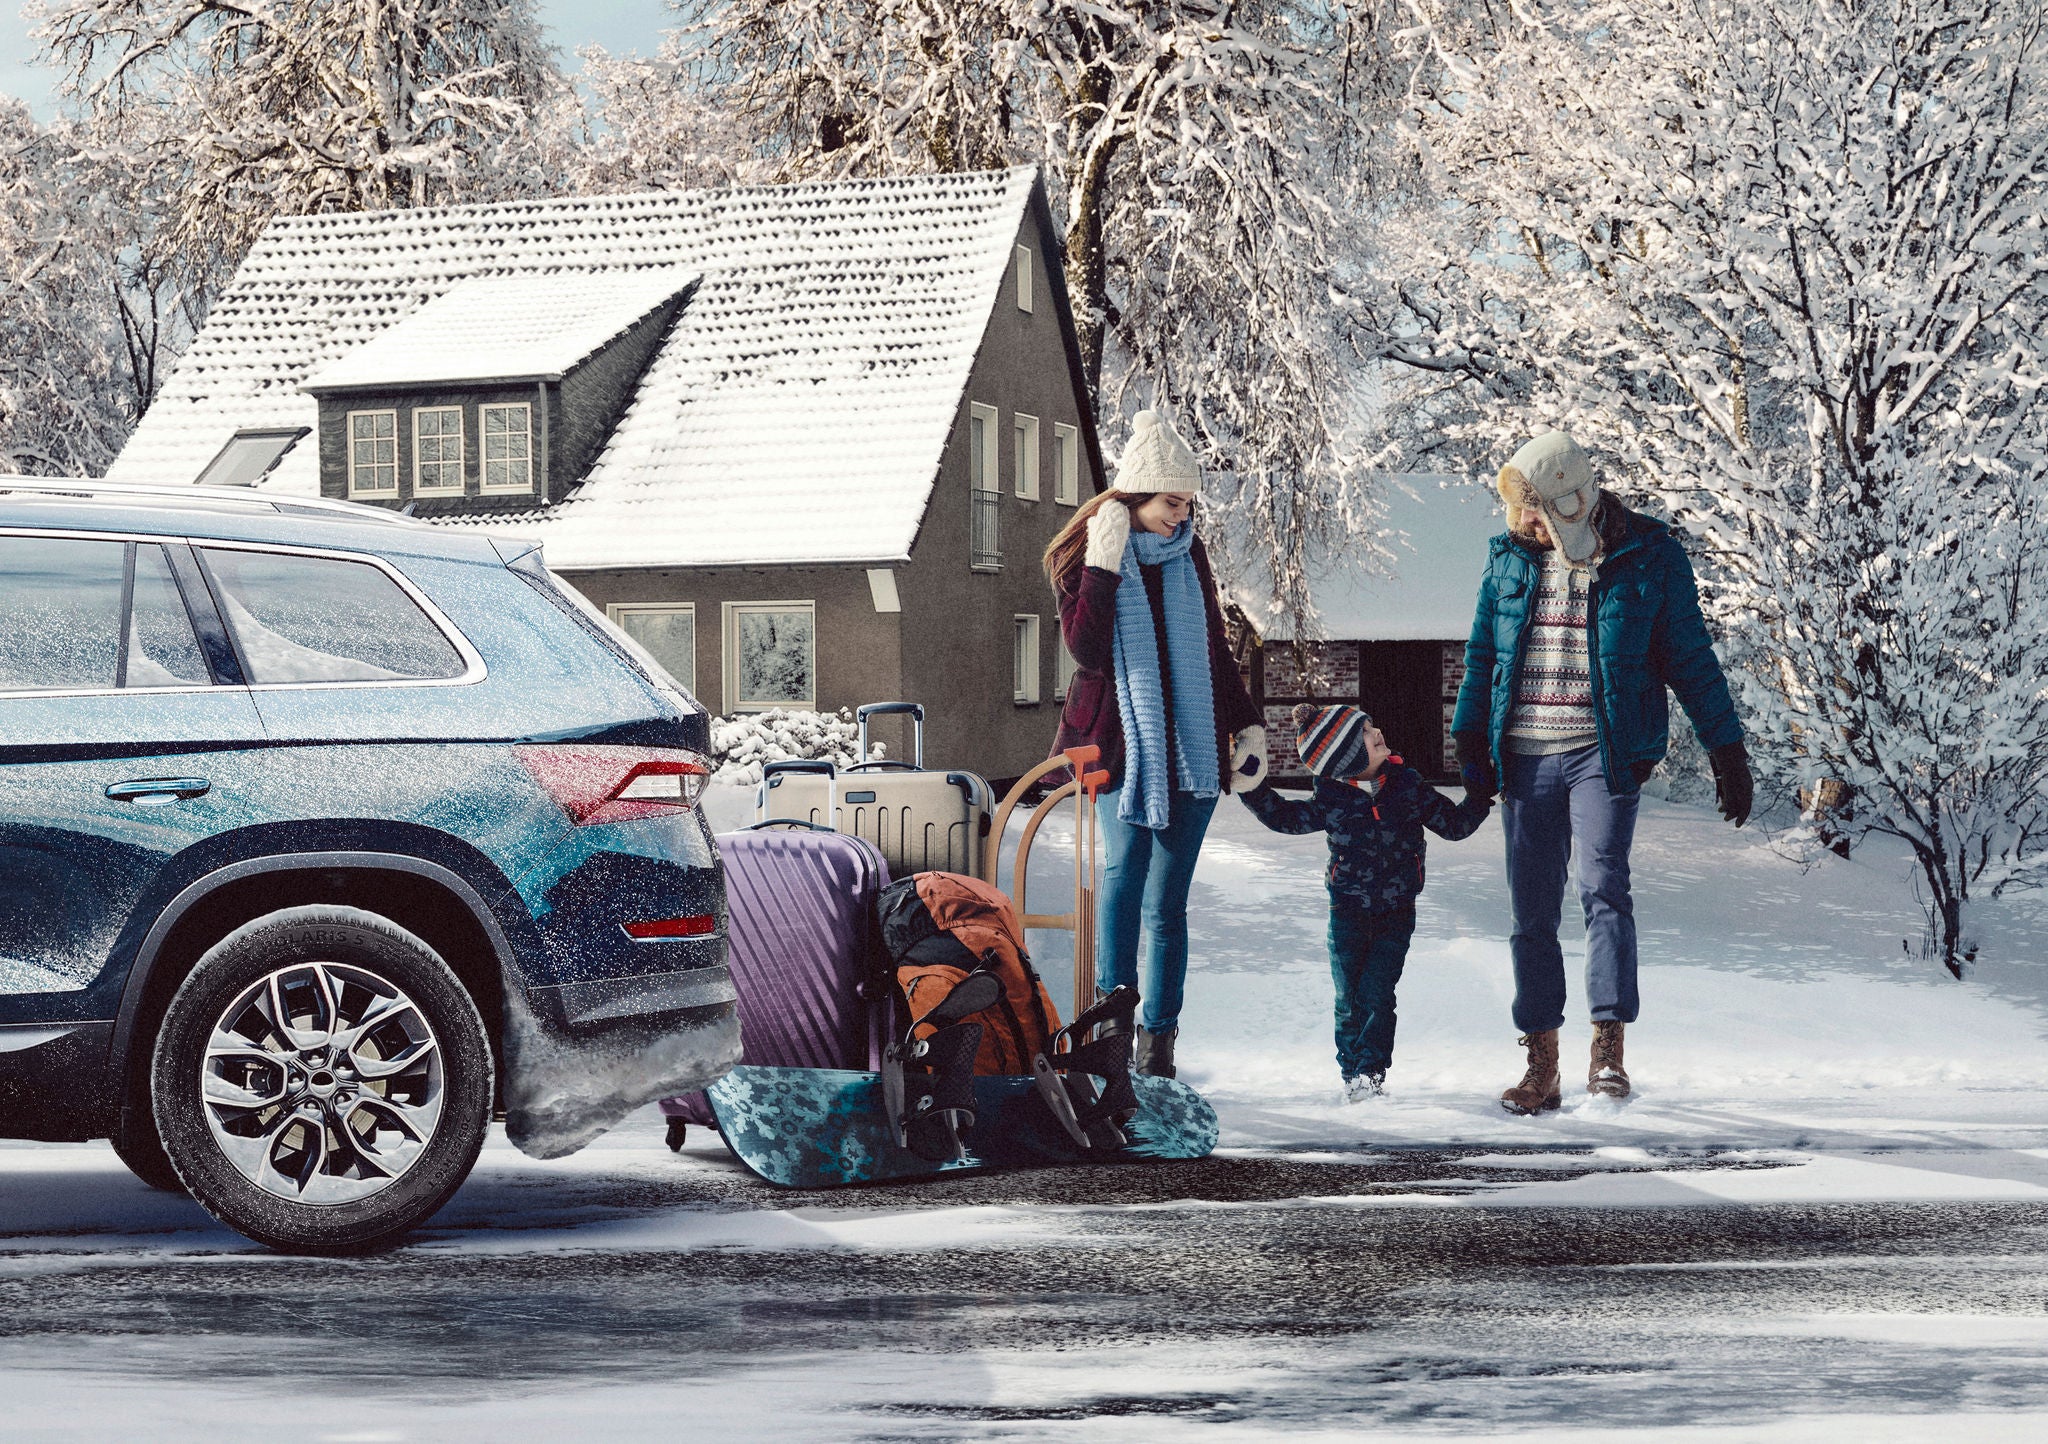 A family is preparing loading their SUV for winter holidays